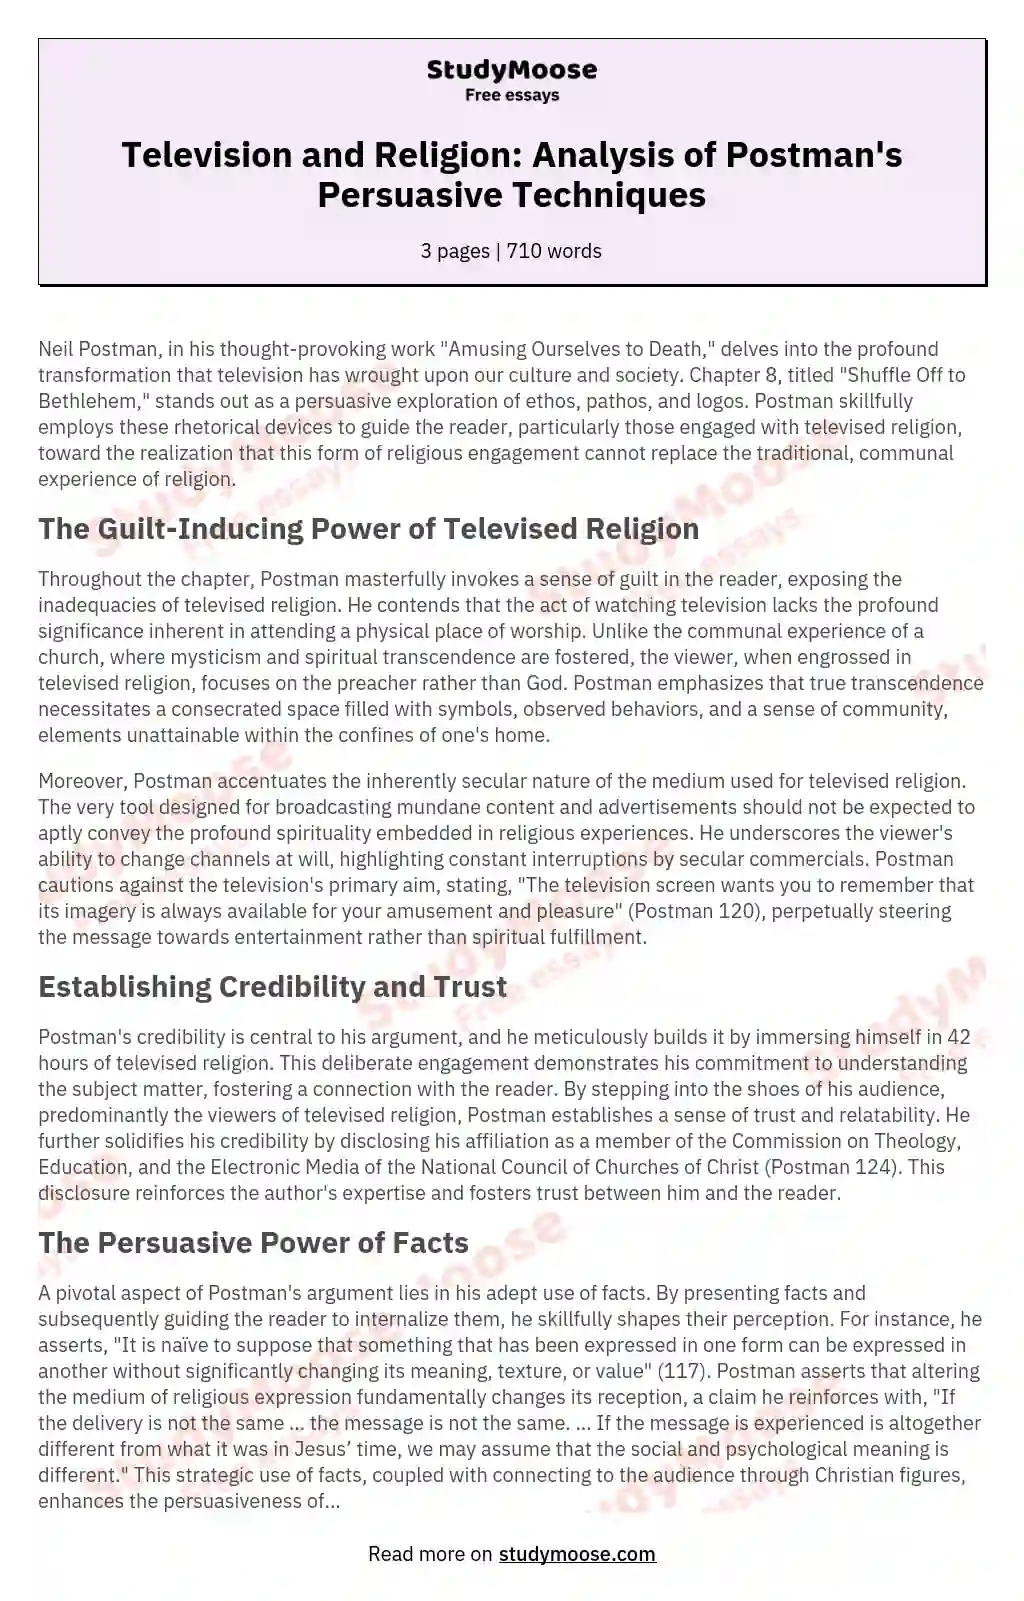 Television and Religion: Analysis of Postman's Persuasive Techniques essay